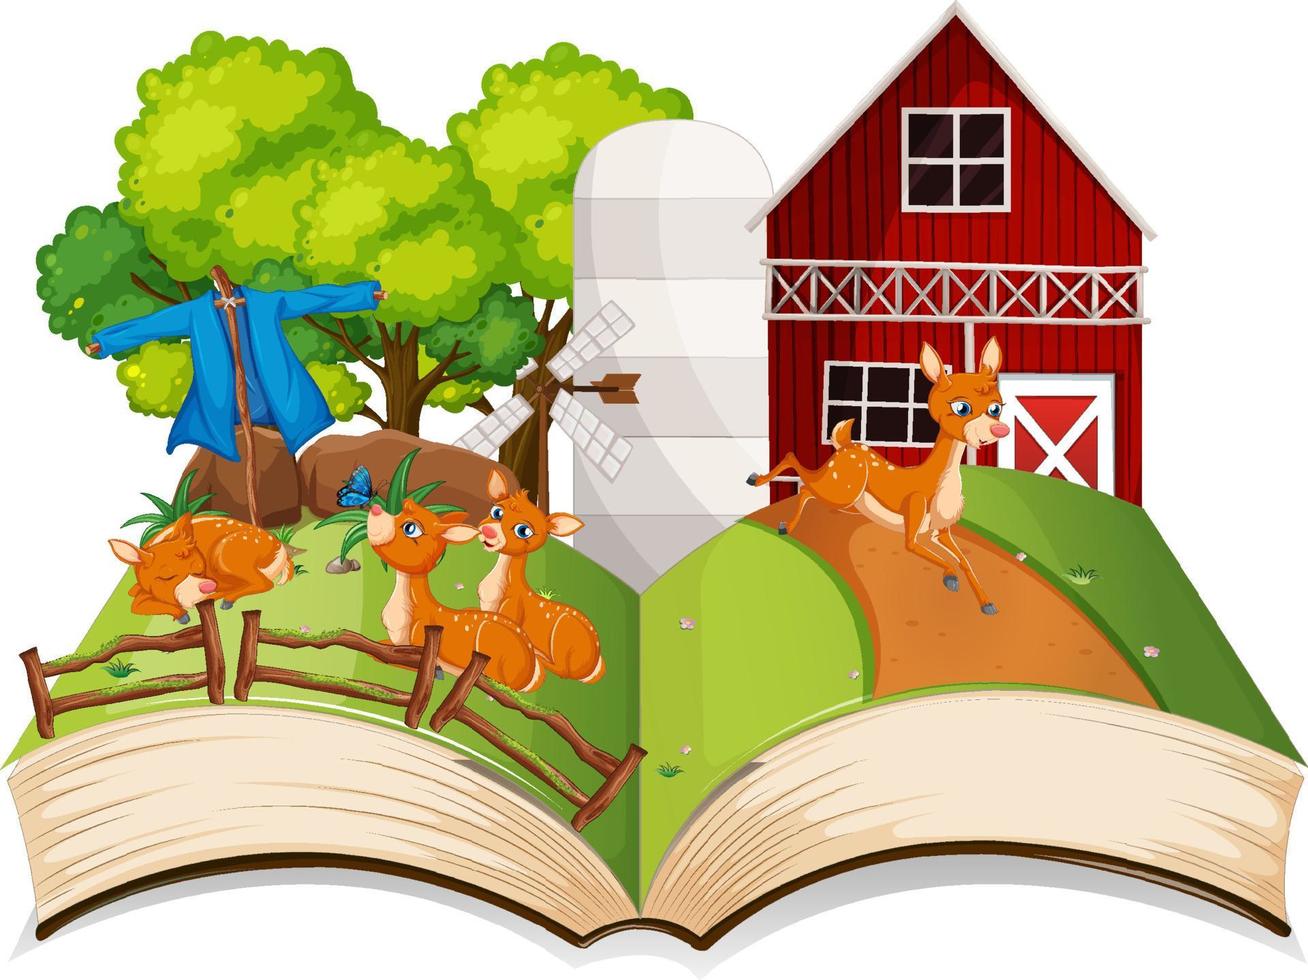 Farm scene with many deers by the barn vector